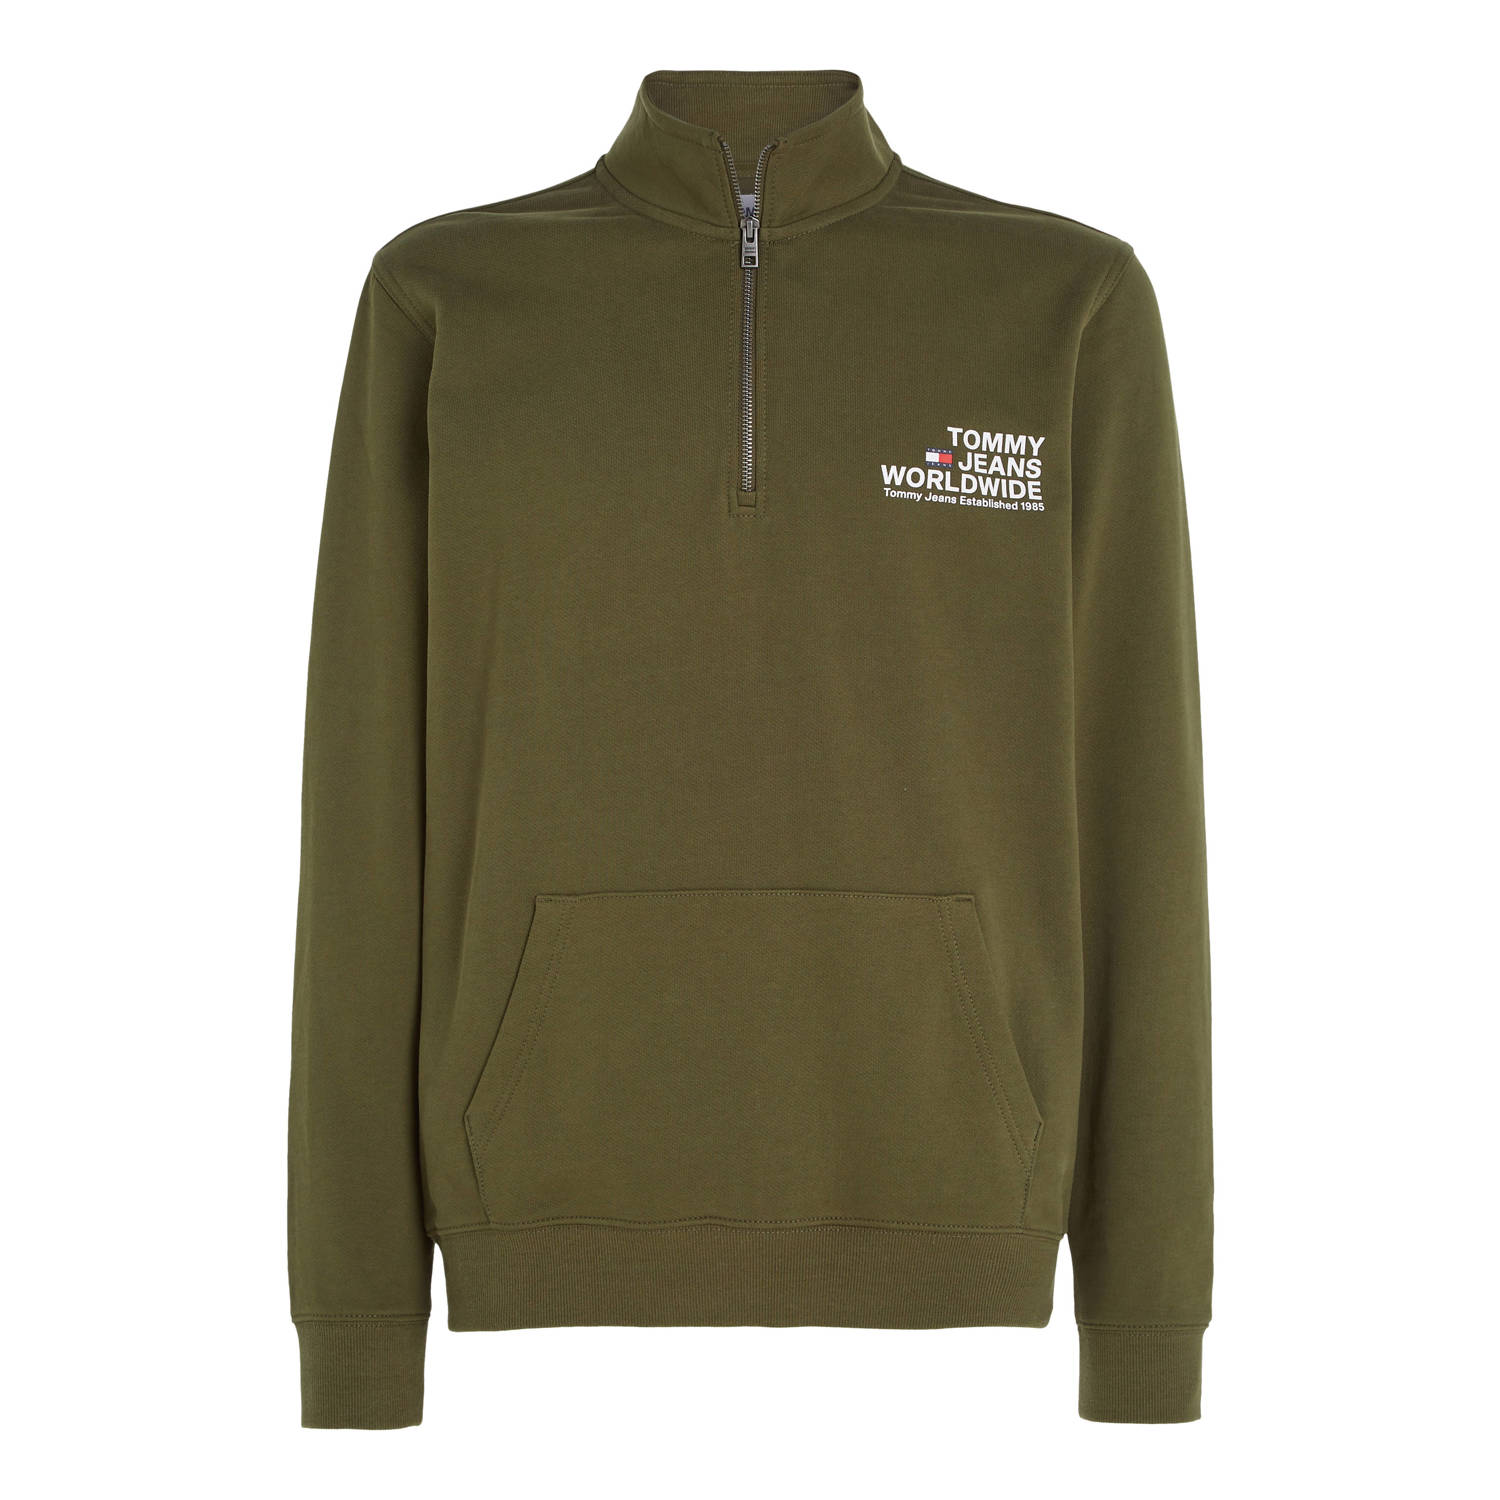 Tommy Jeans sweater met logo drab olive green